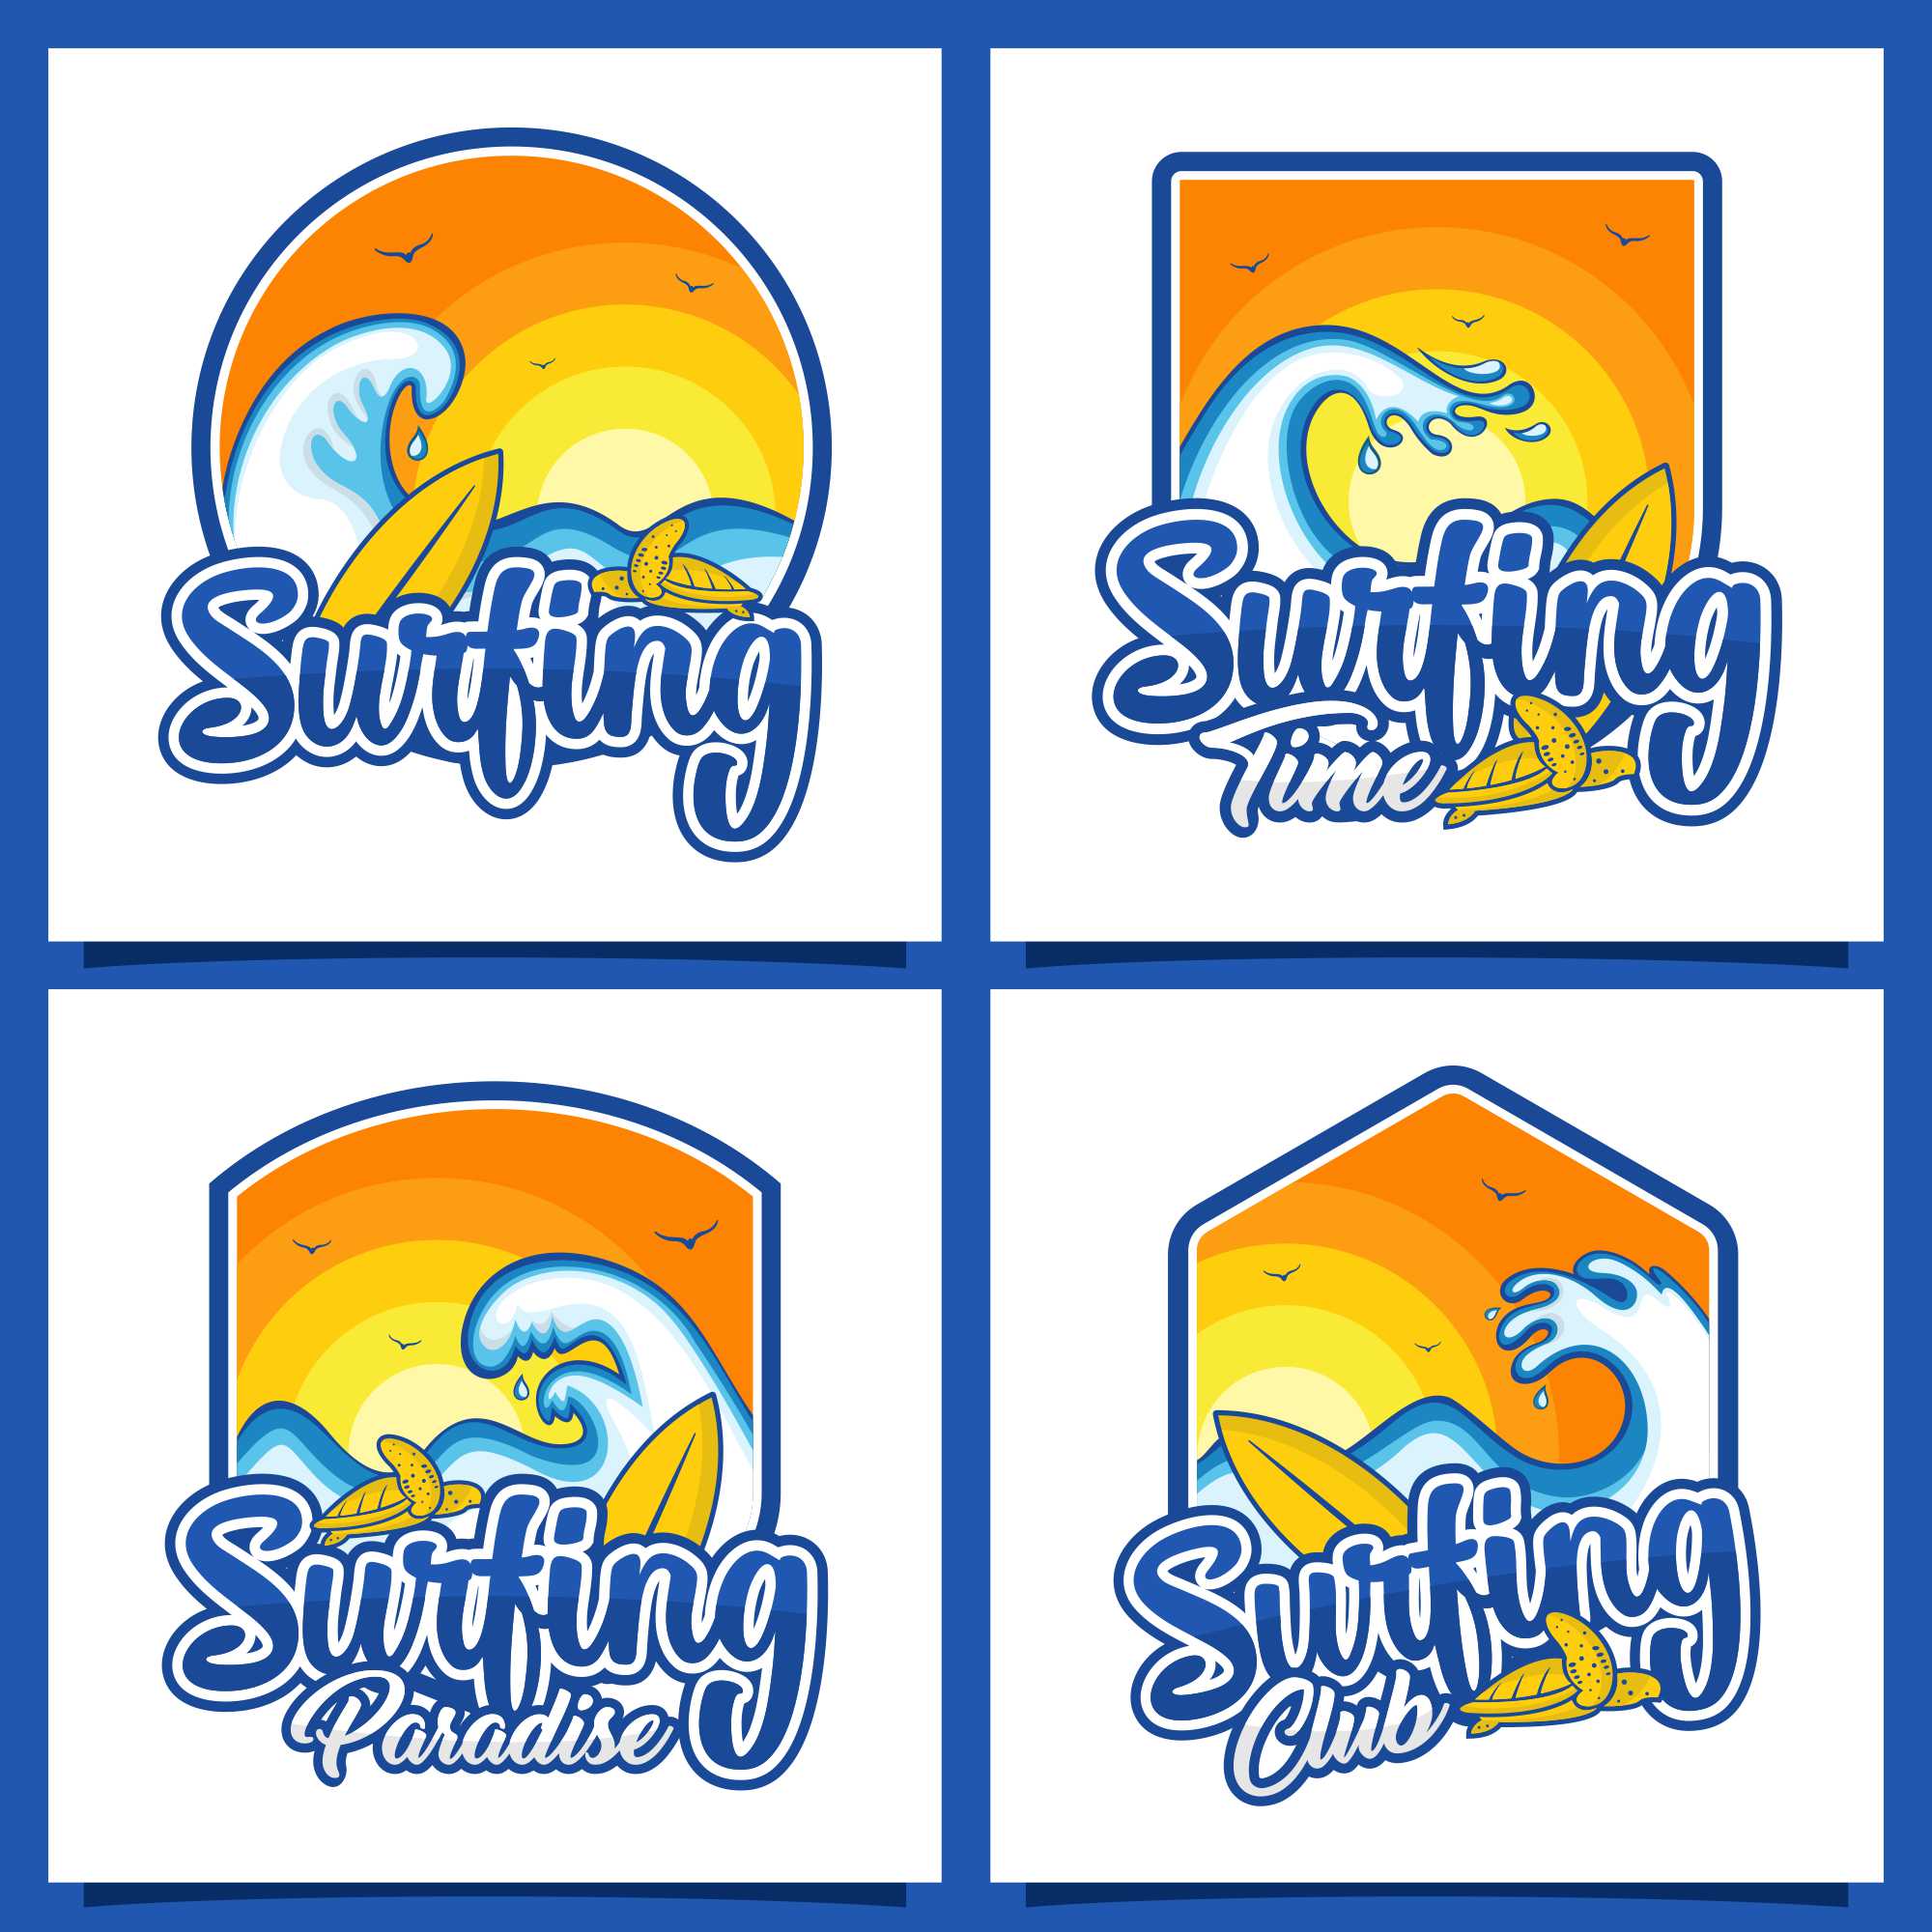 Set Surfing Club logo design collection - $4 cover image.